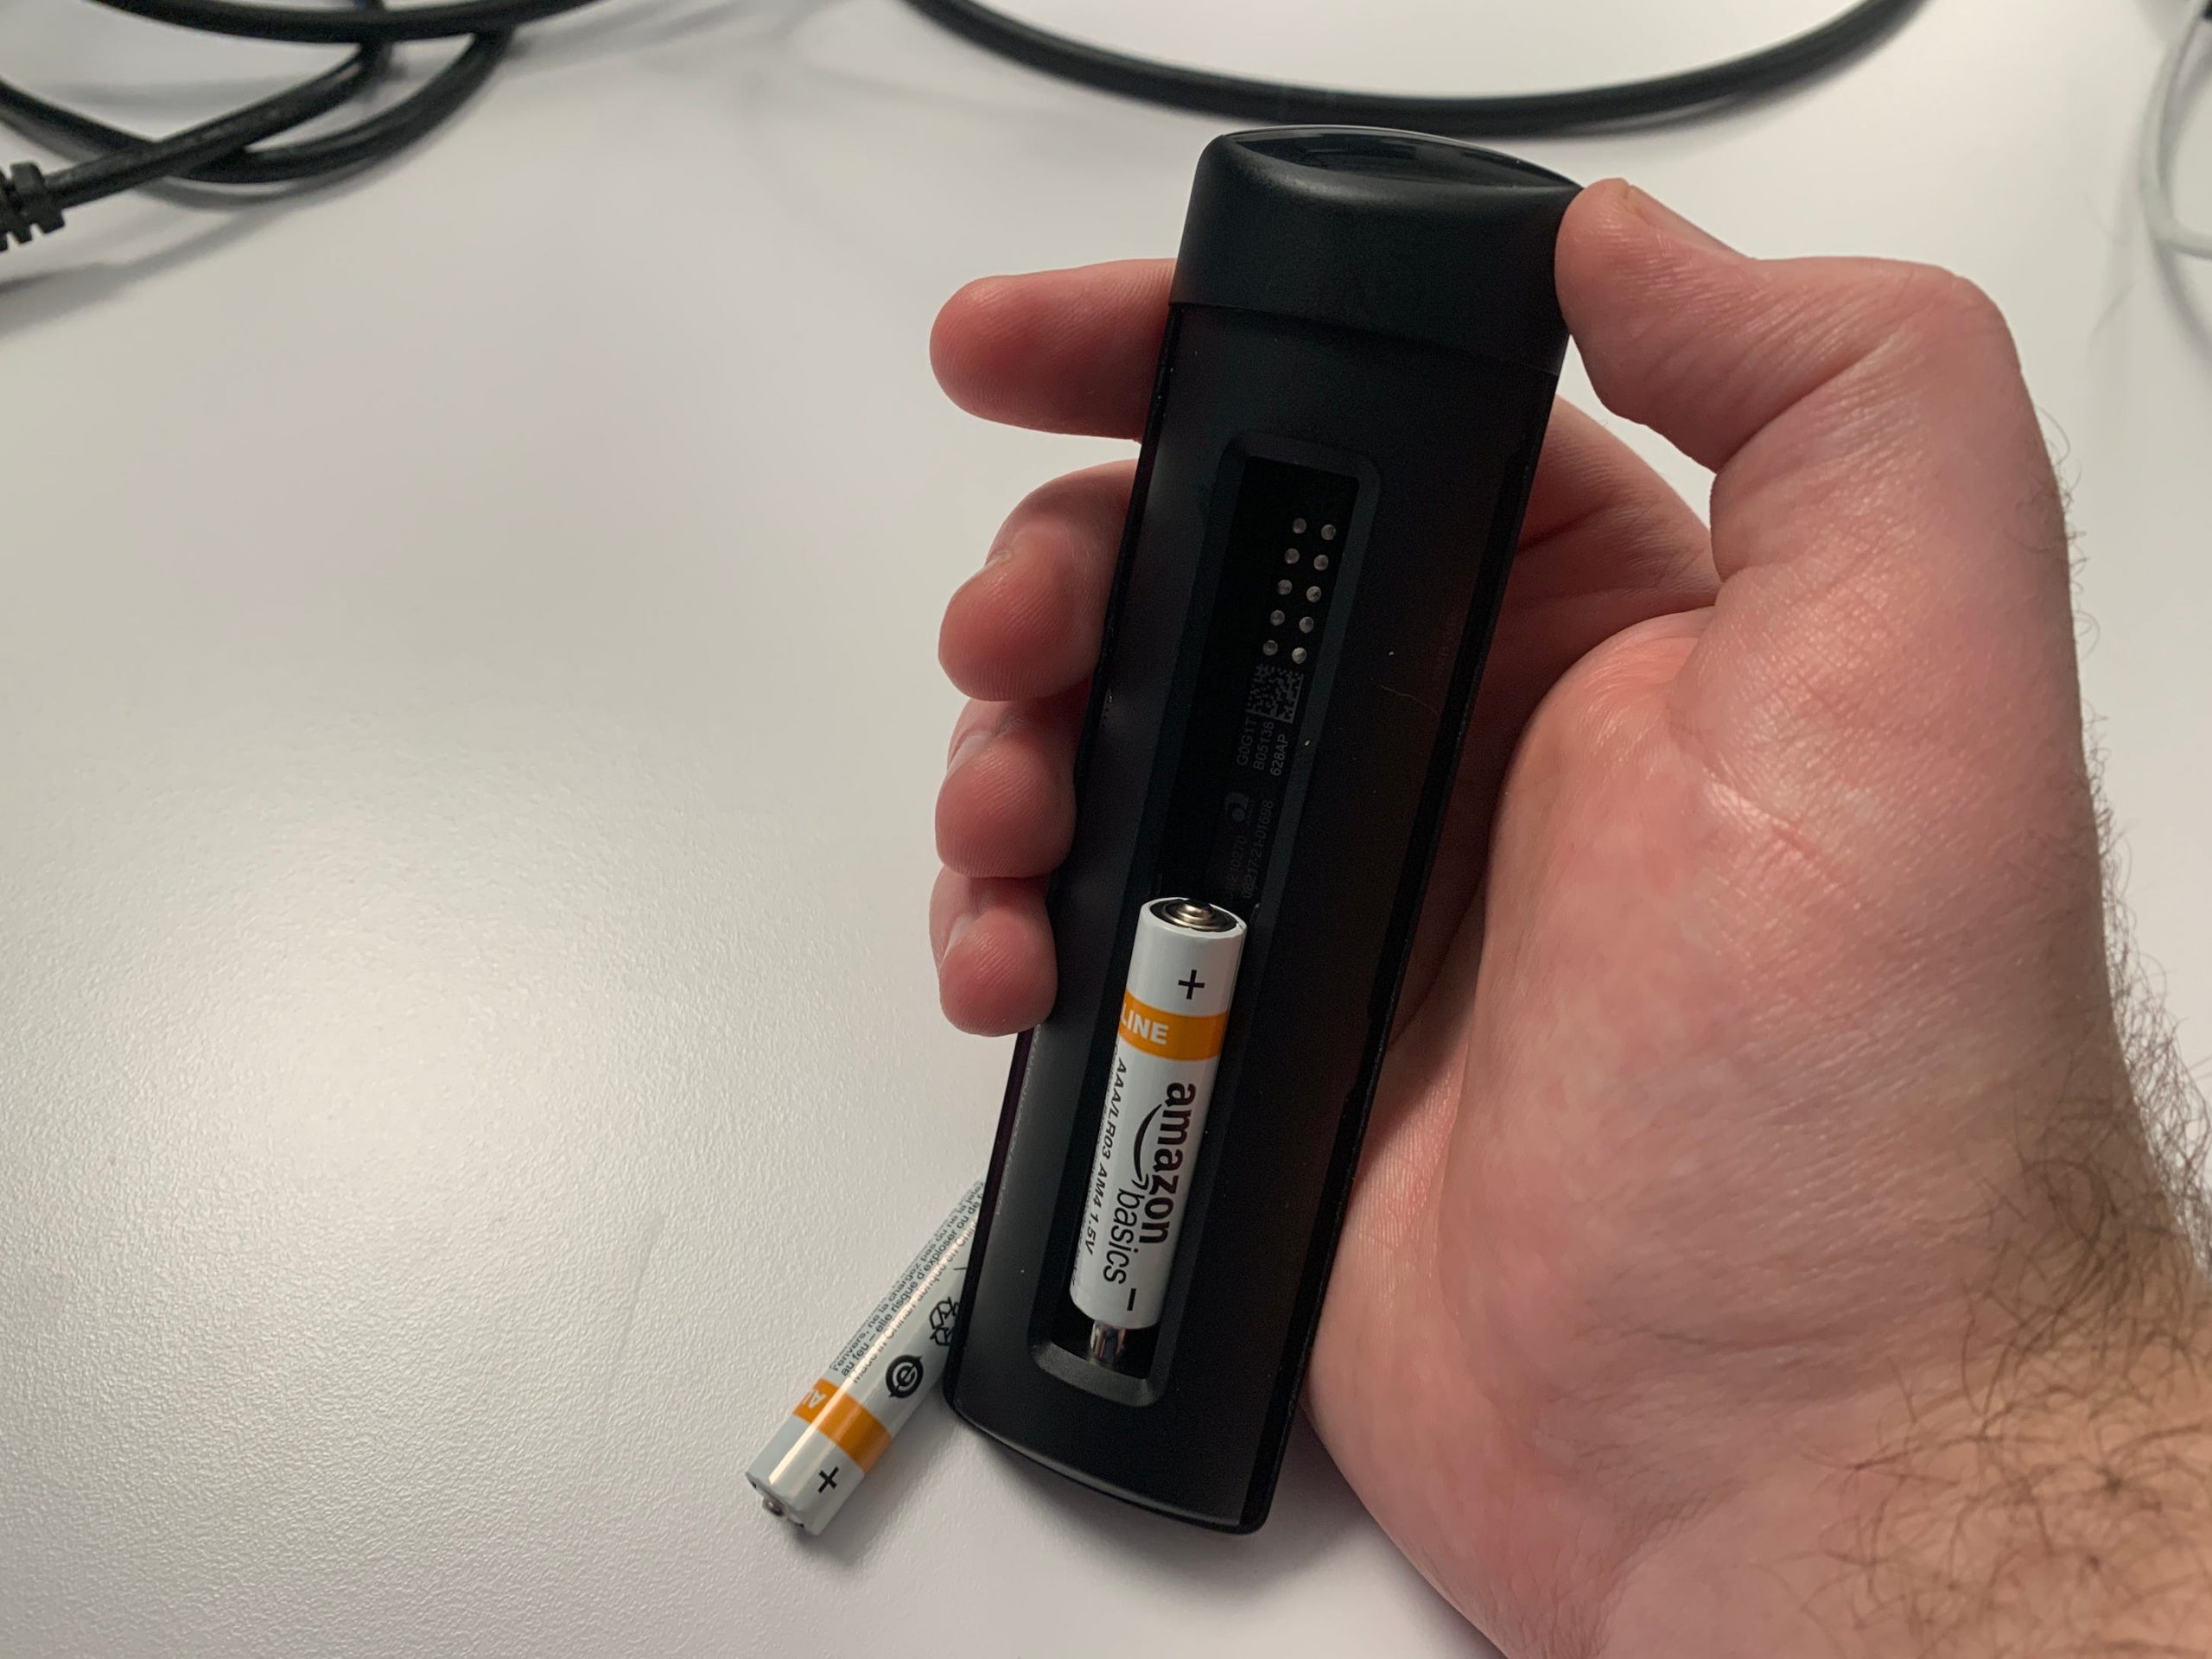 Taking the batteries out of an Amazon Firestick remote.